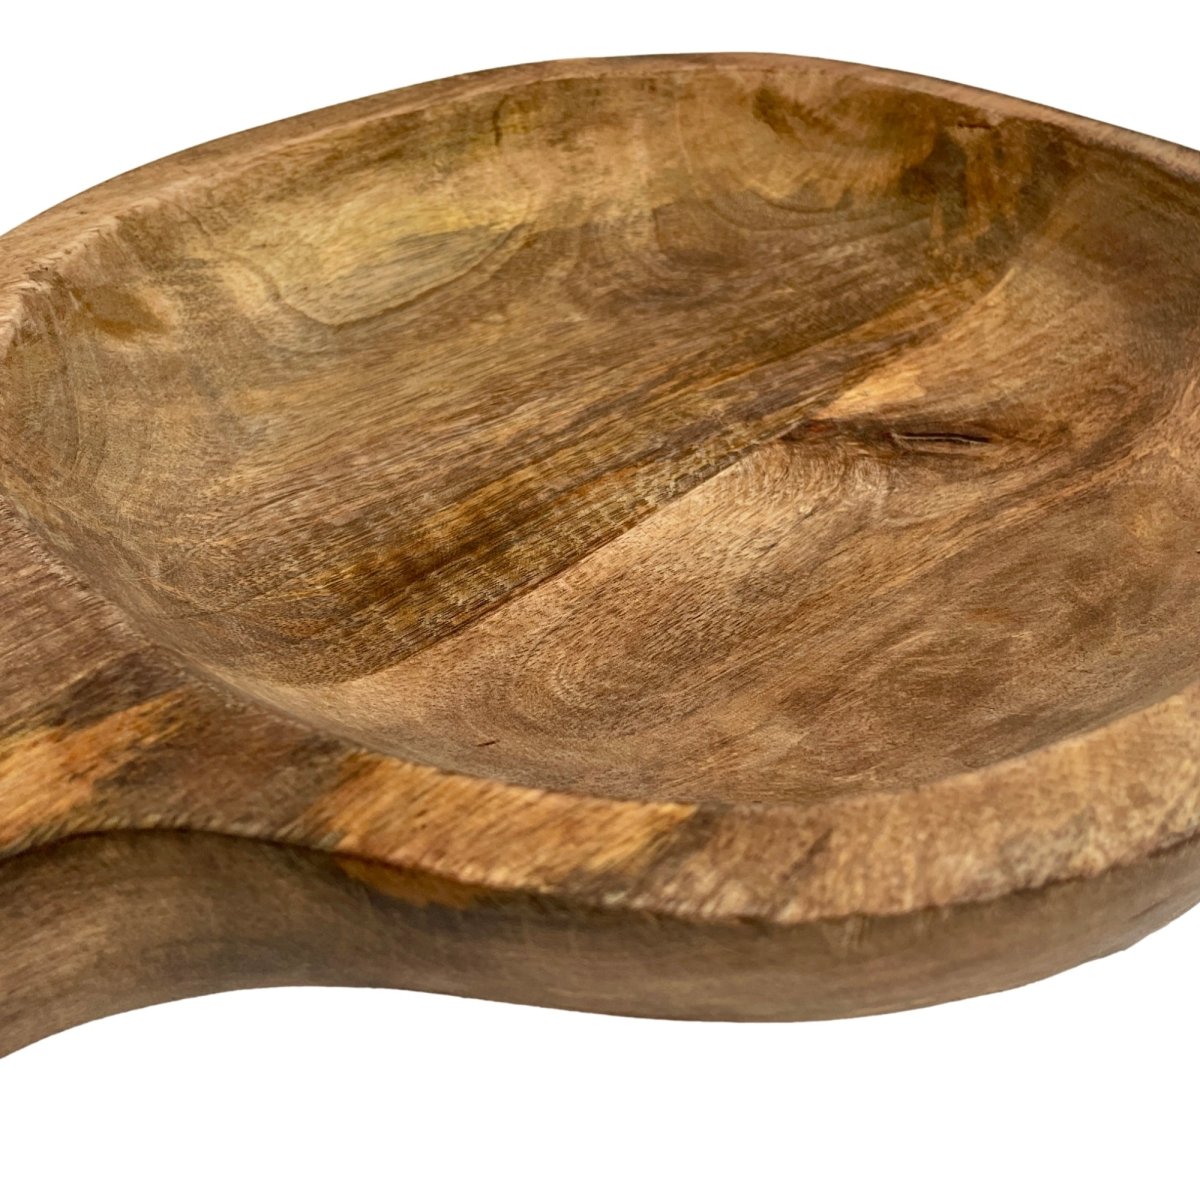 Alpha Set of 3 Mango Wood Trays - Rustic Furniture Outlet